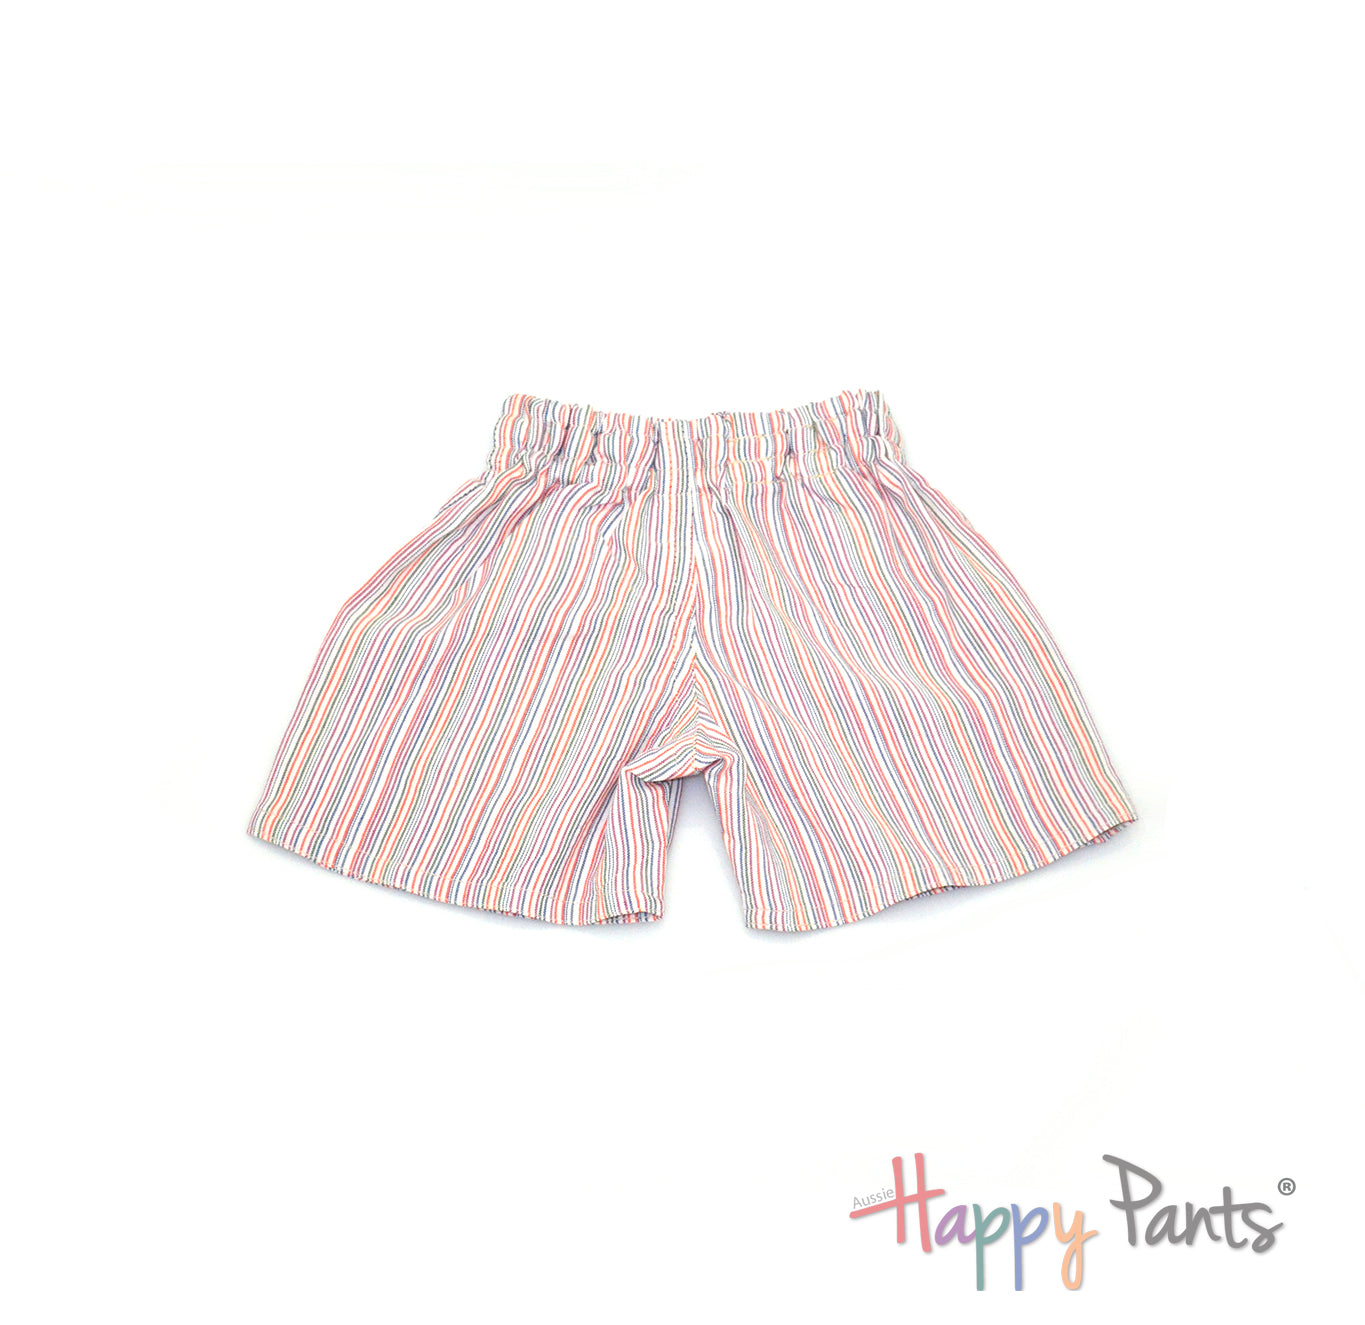 Cotton Candy Dreams Shorts for Girls